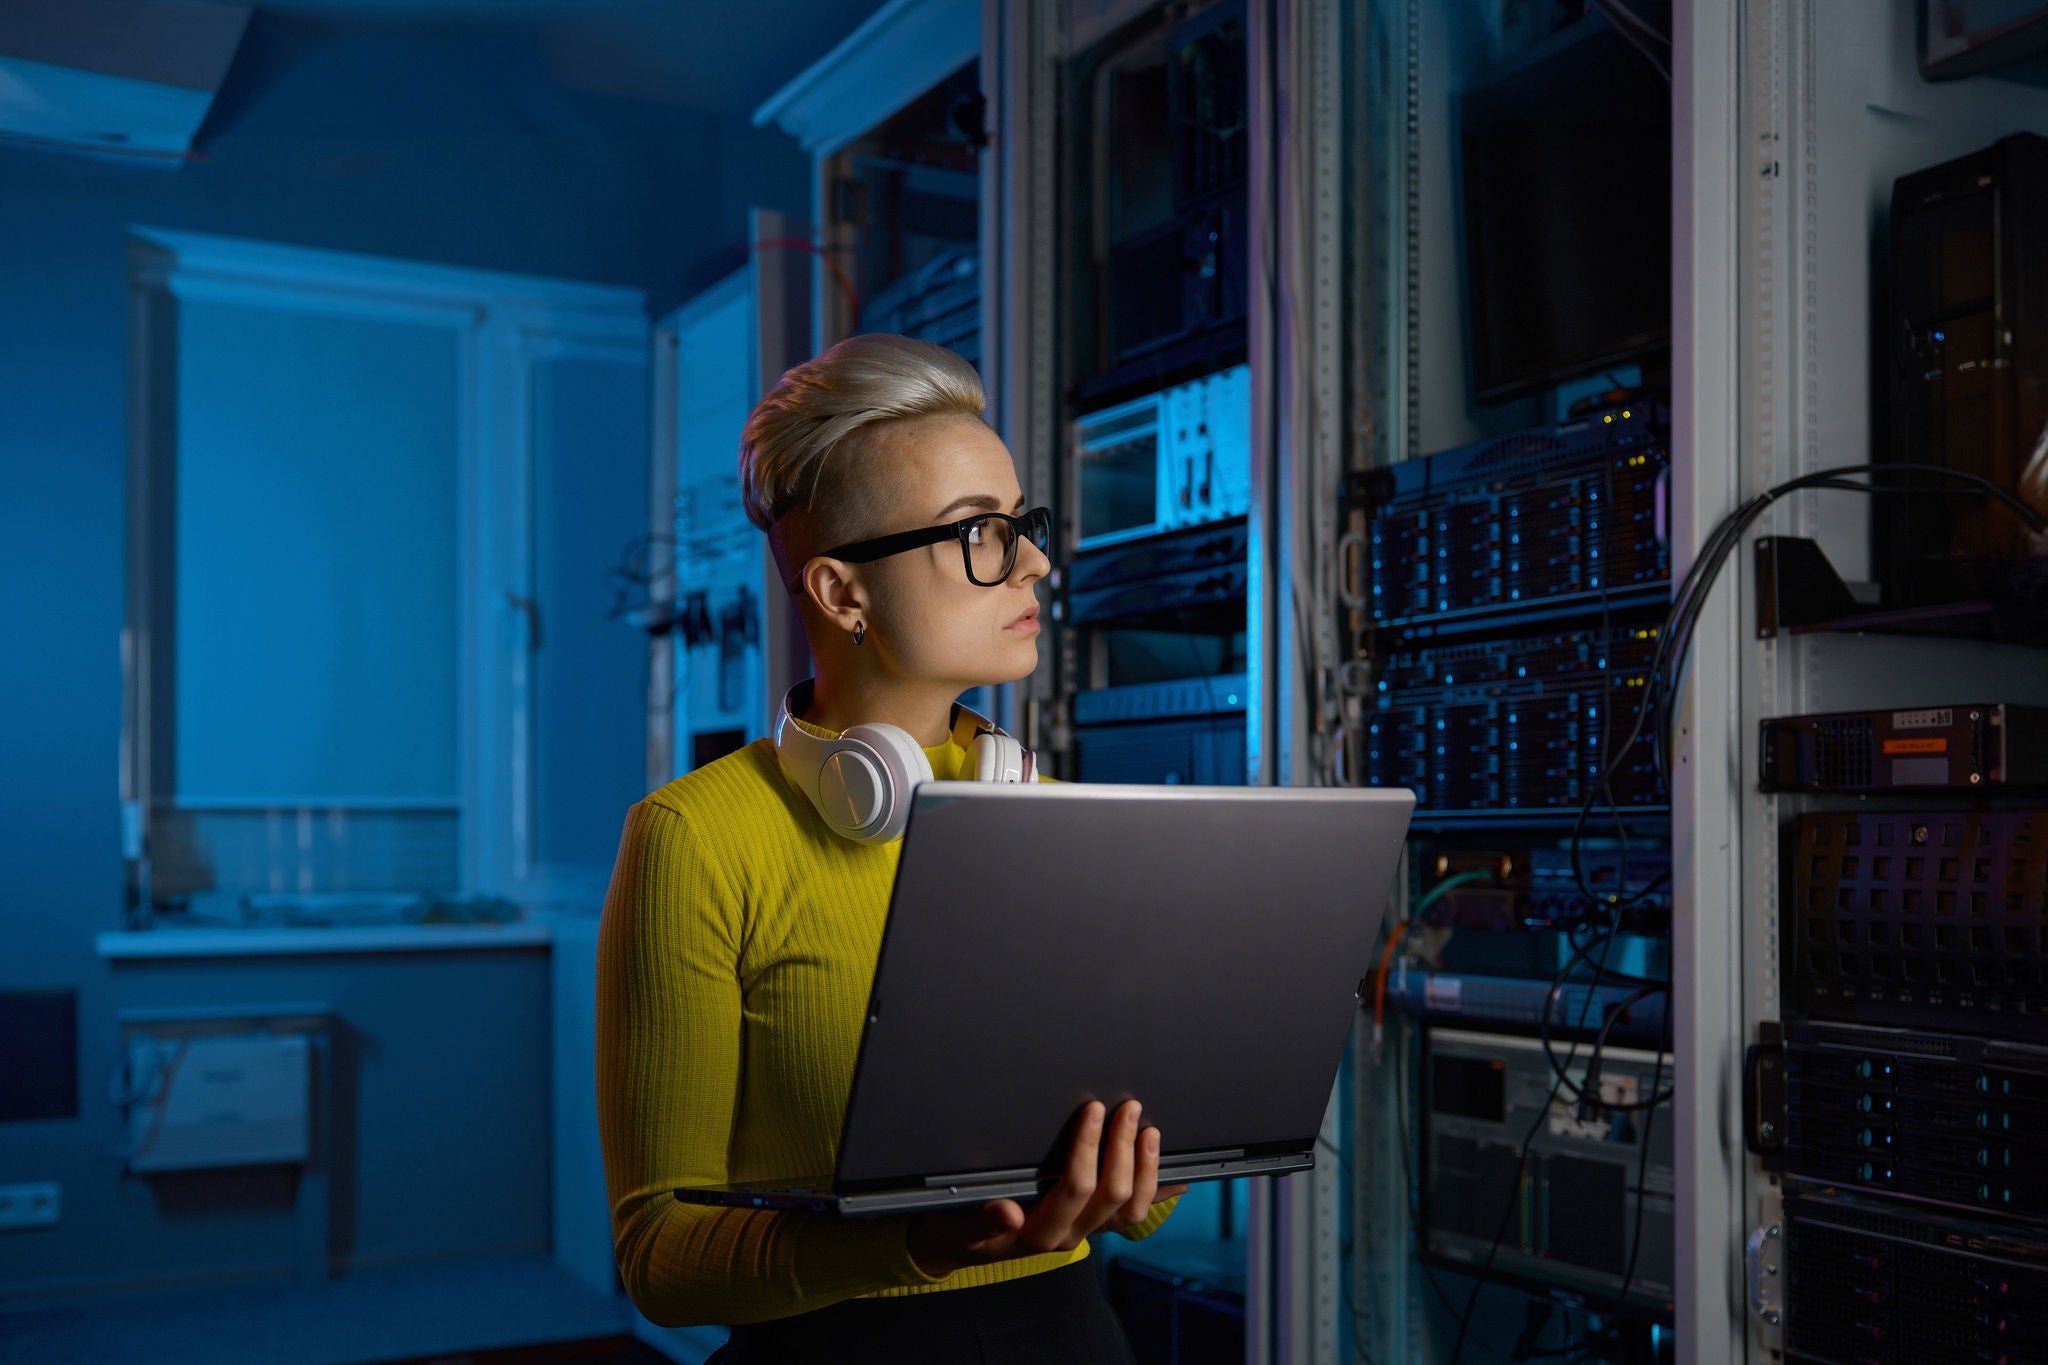 Portrait of concentrated young woman coder solving problem or troubleshooting using laptop in dark server room of modern data center